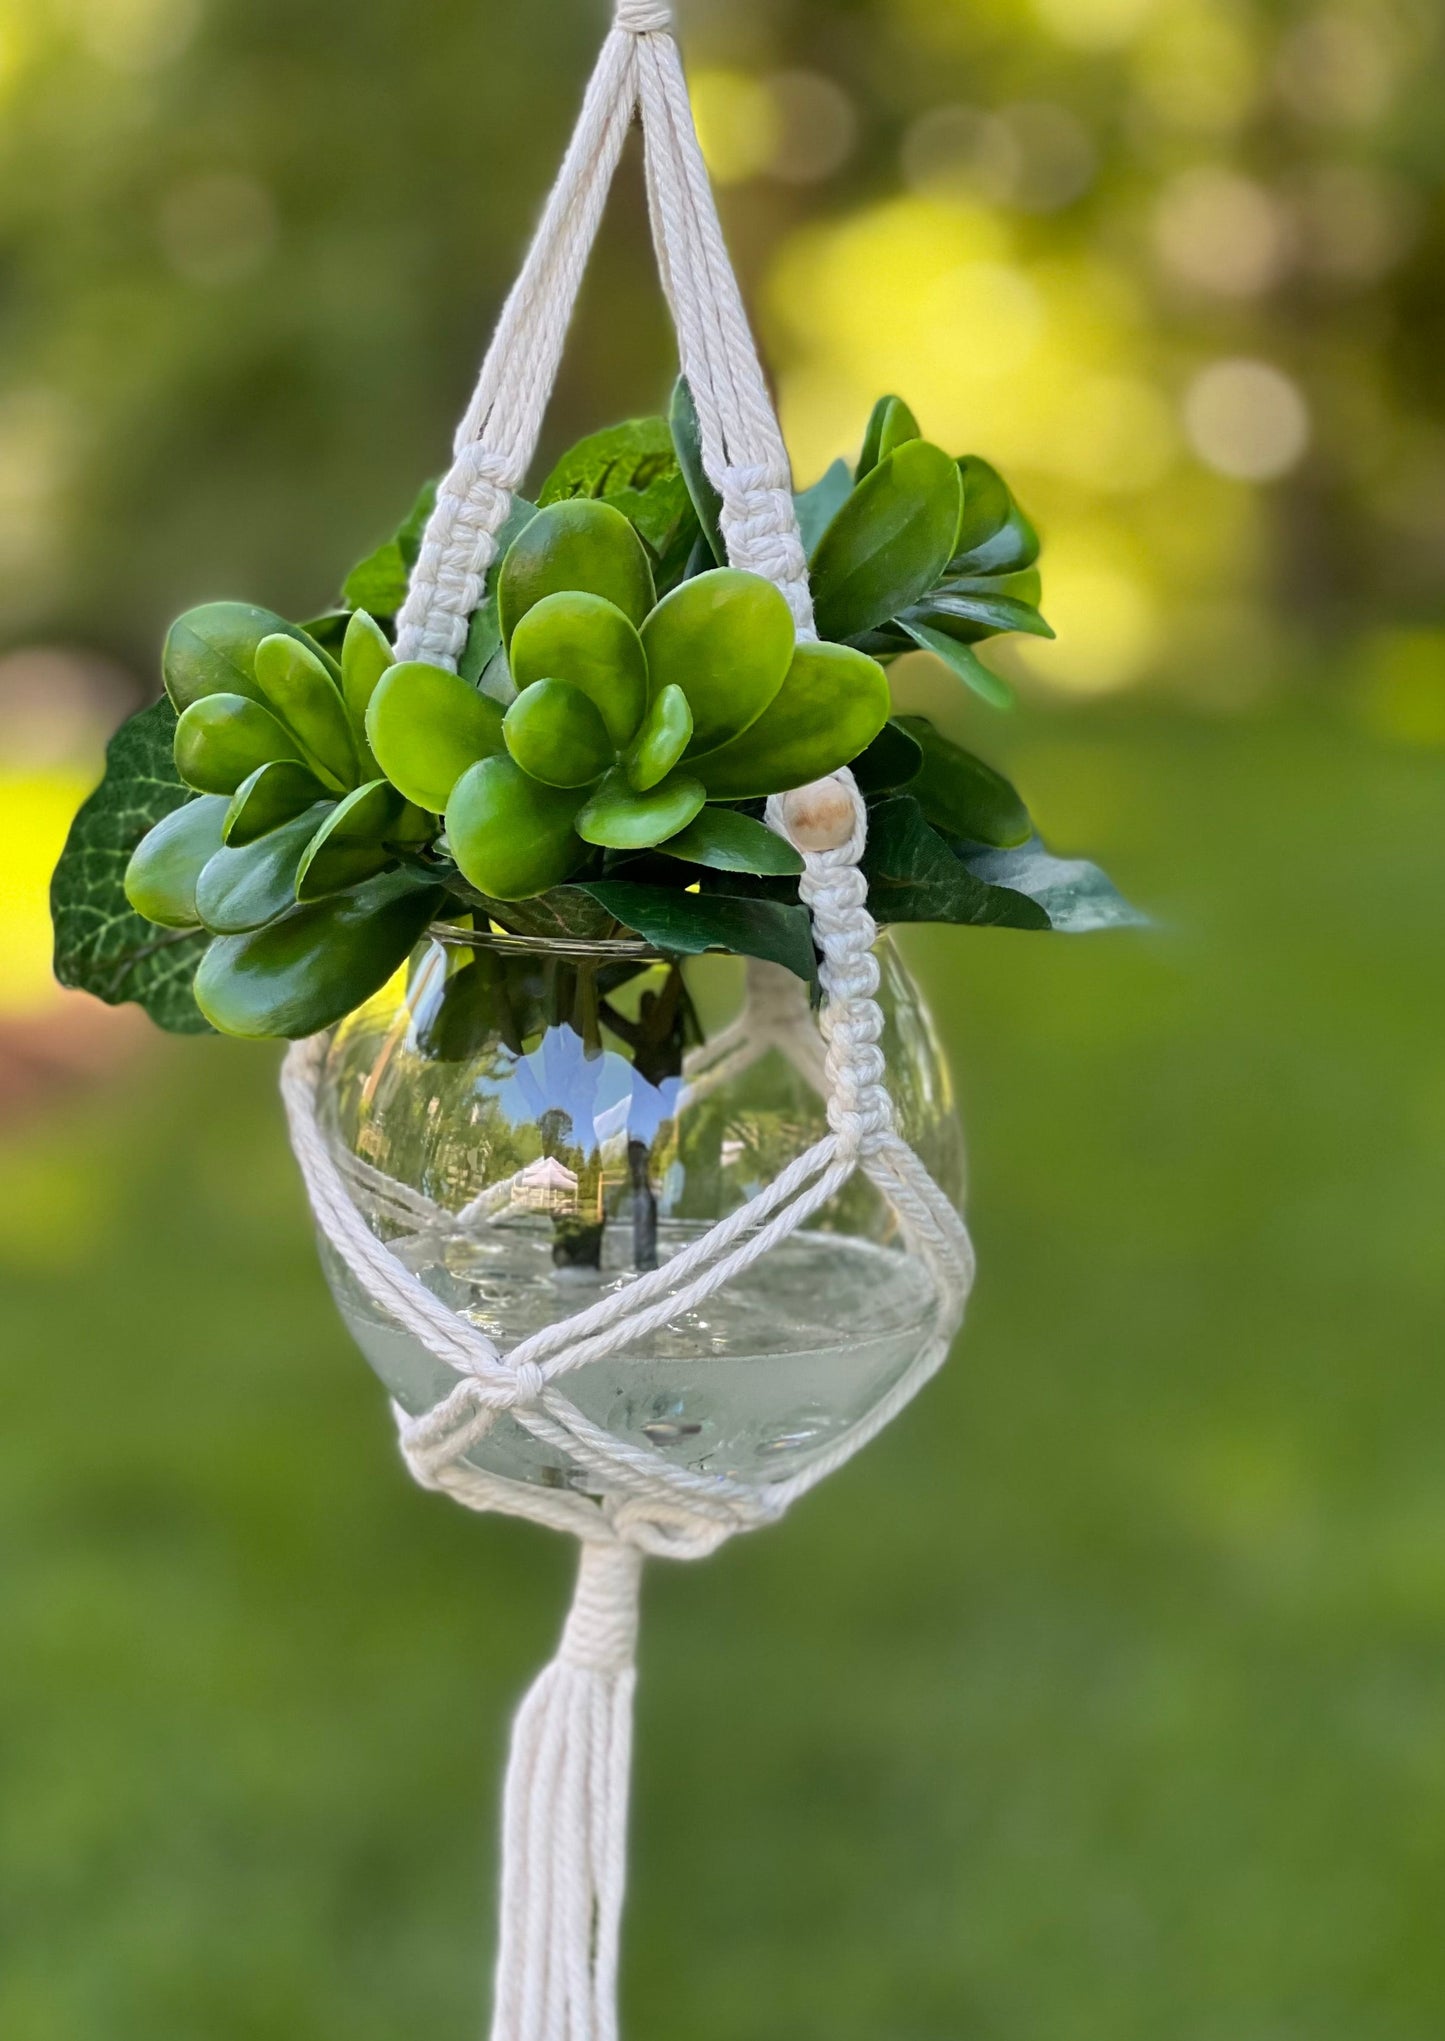 Boxwood and Ivy Hanging Macrame Planter in Glass Bowl